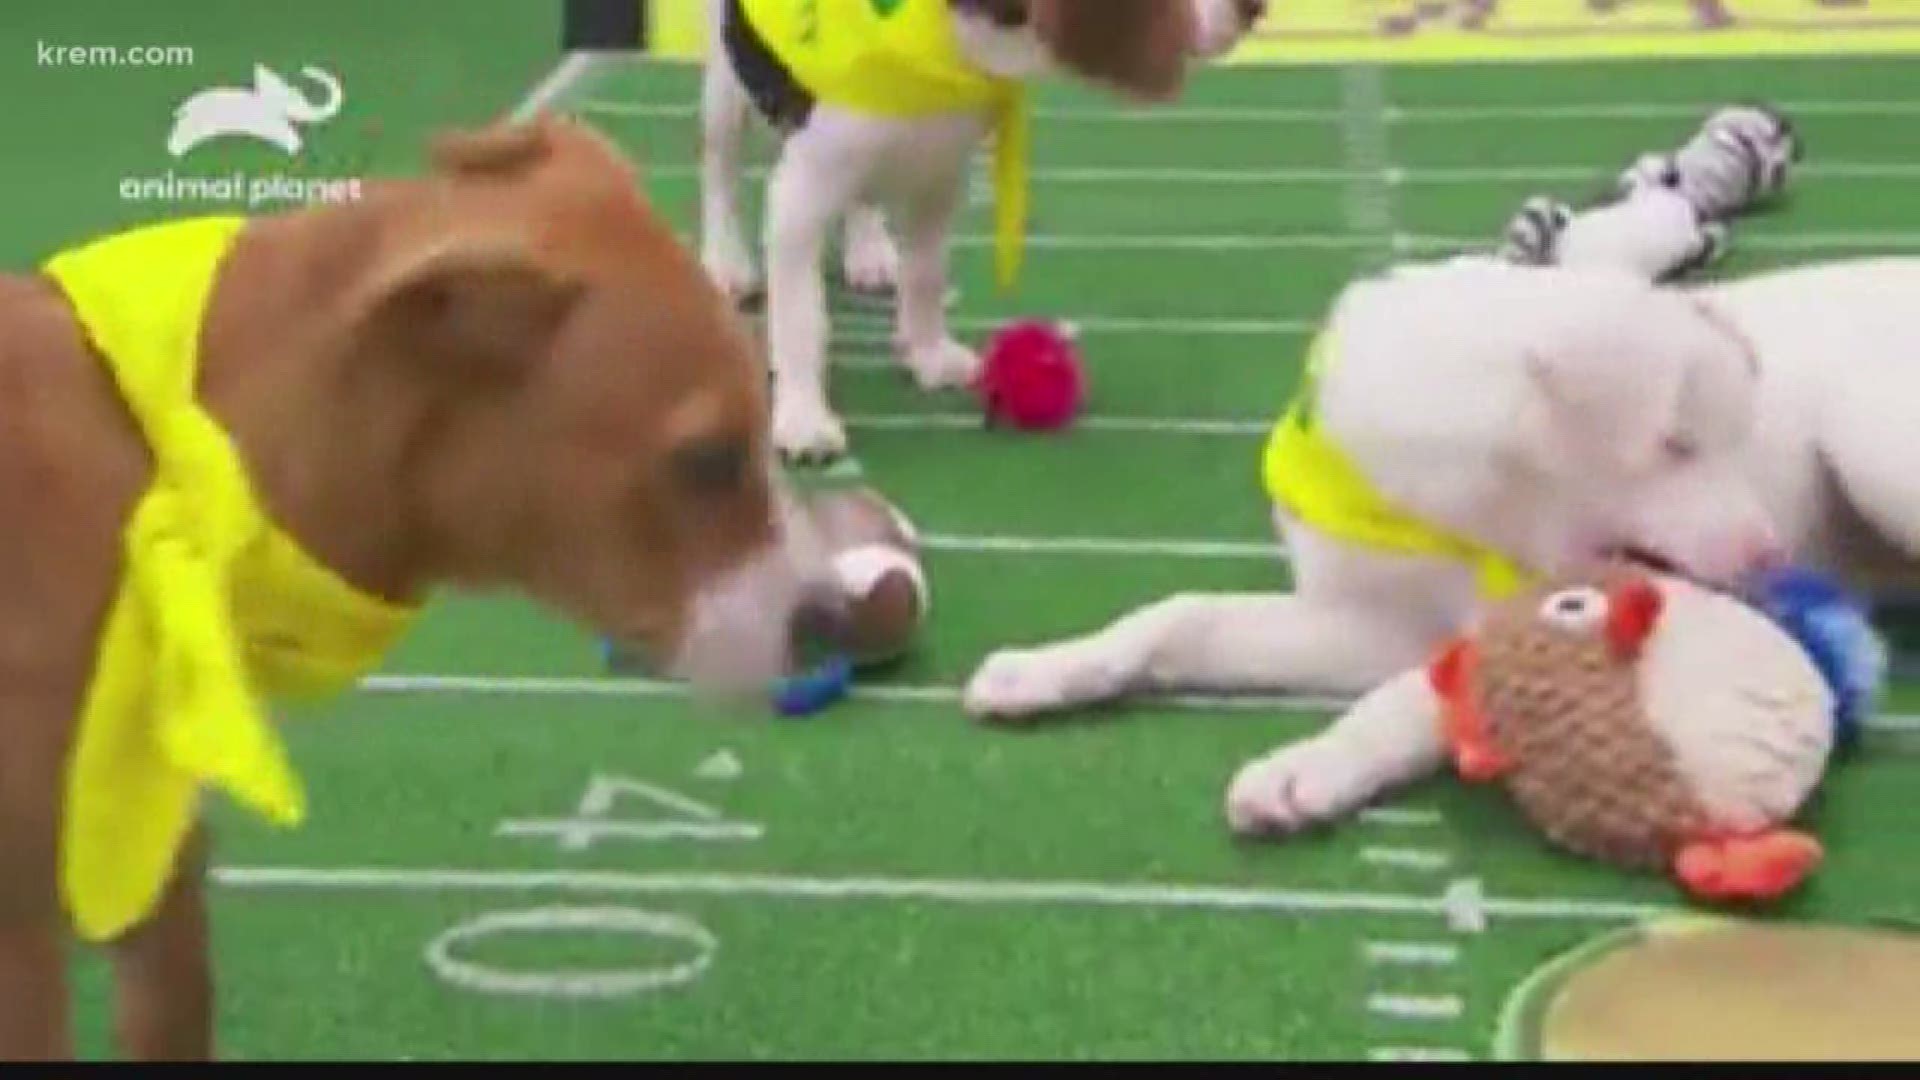 A blind and deaf puppy from Spokane appeared in Animal Planet's "Puppy Bowl" program.